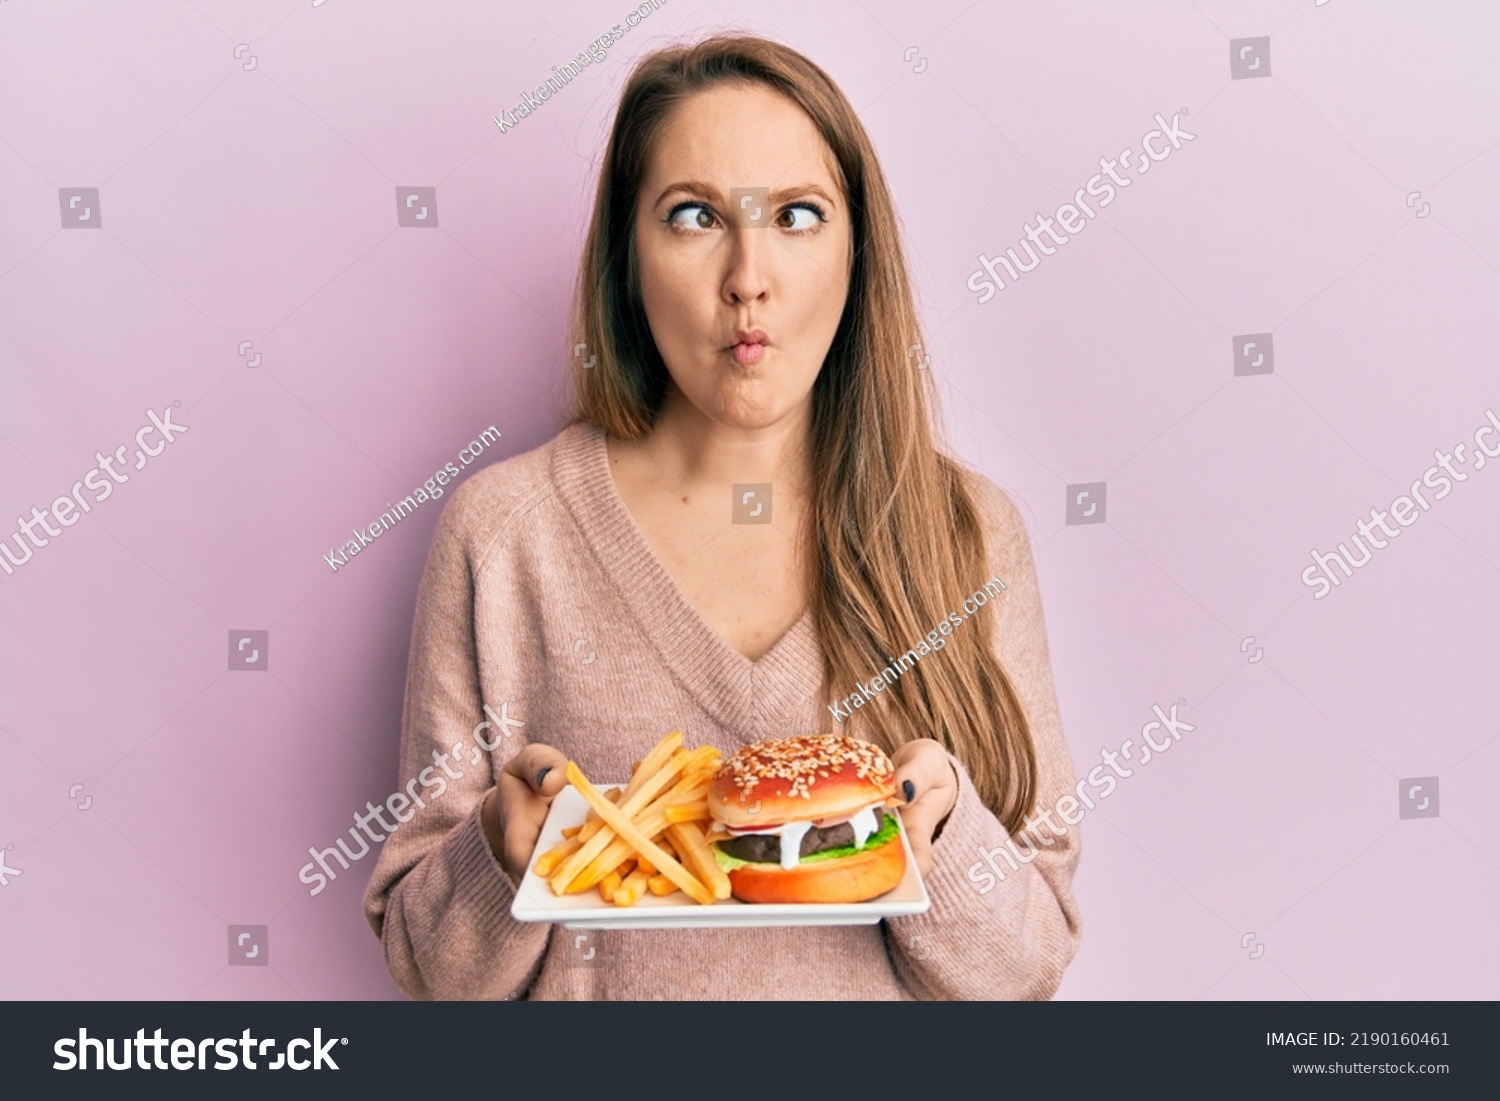 Young blonde woman eating a tasty classic burger with fries making fish face with mouth and squinting eyes, crazy and comical.  #2190160461